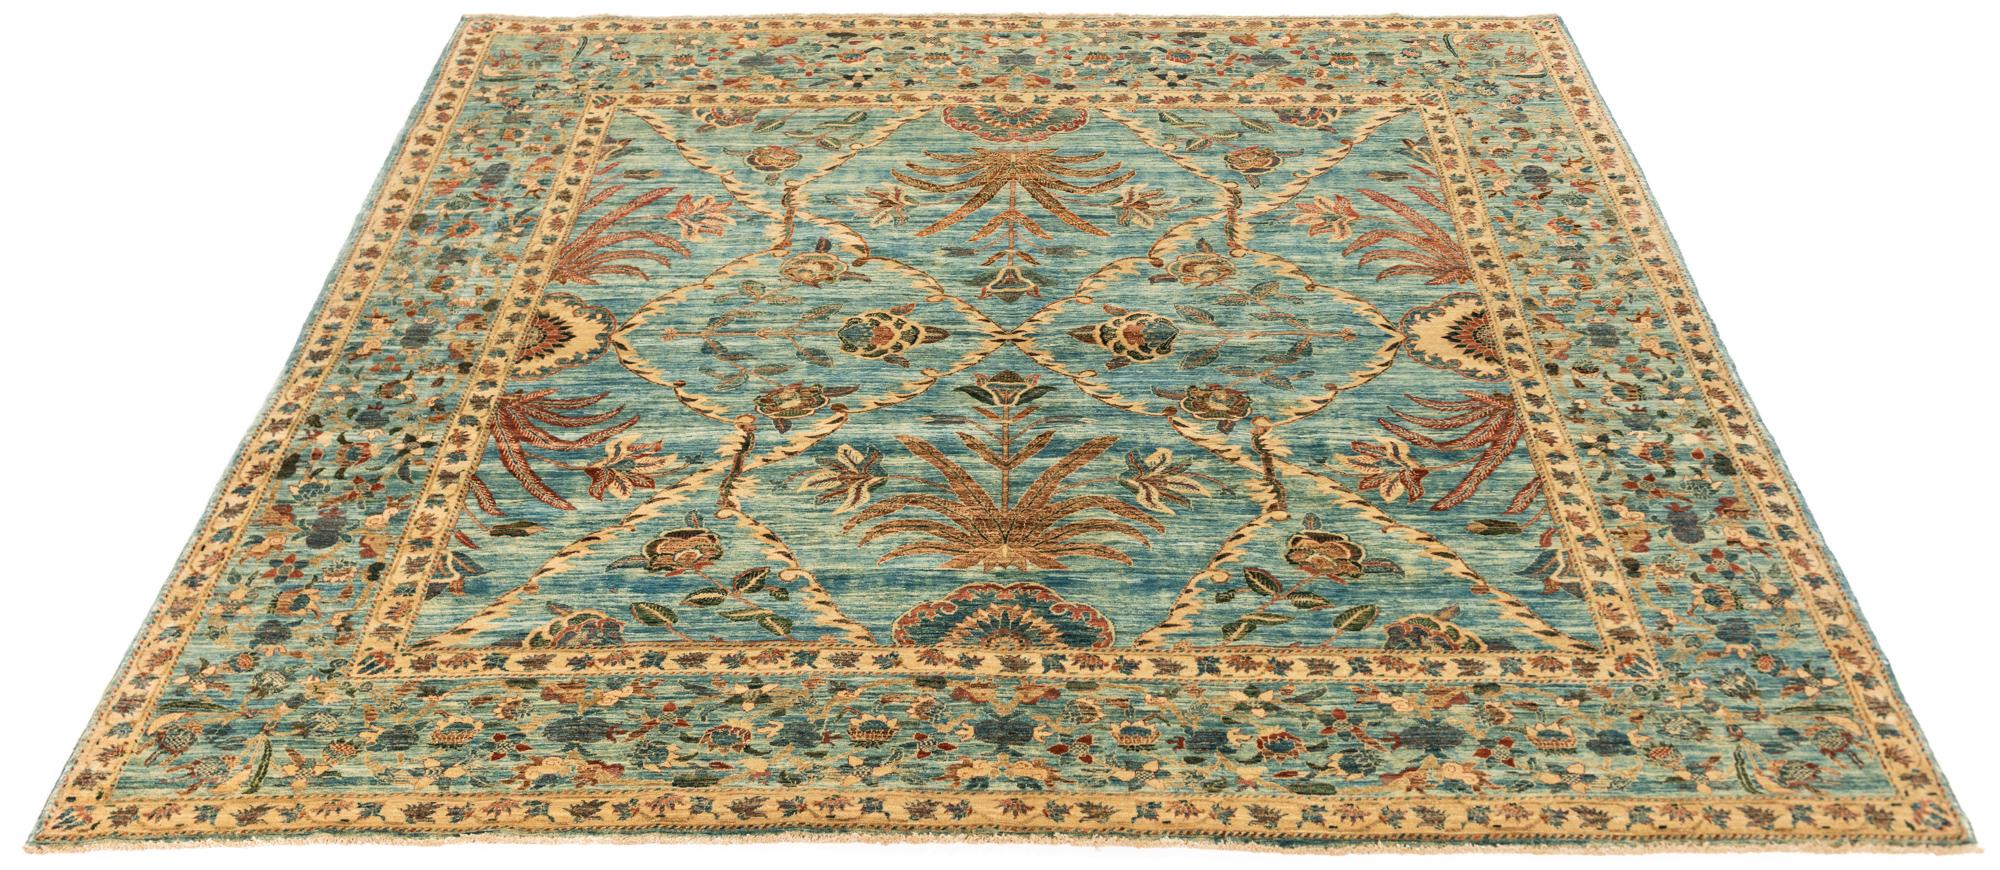 Hand-Knotted New Afghan Transitional Delicate Floral Design Rug with a Light Blue Main Field